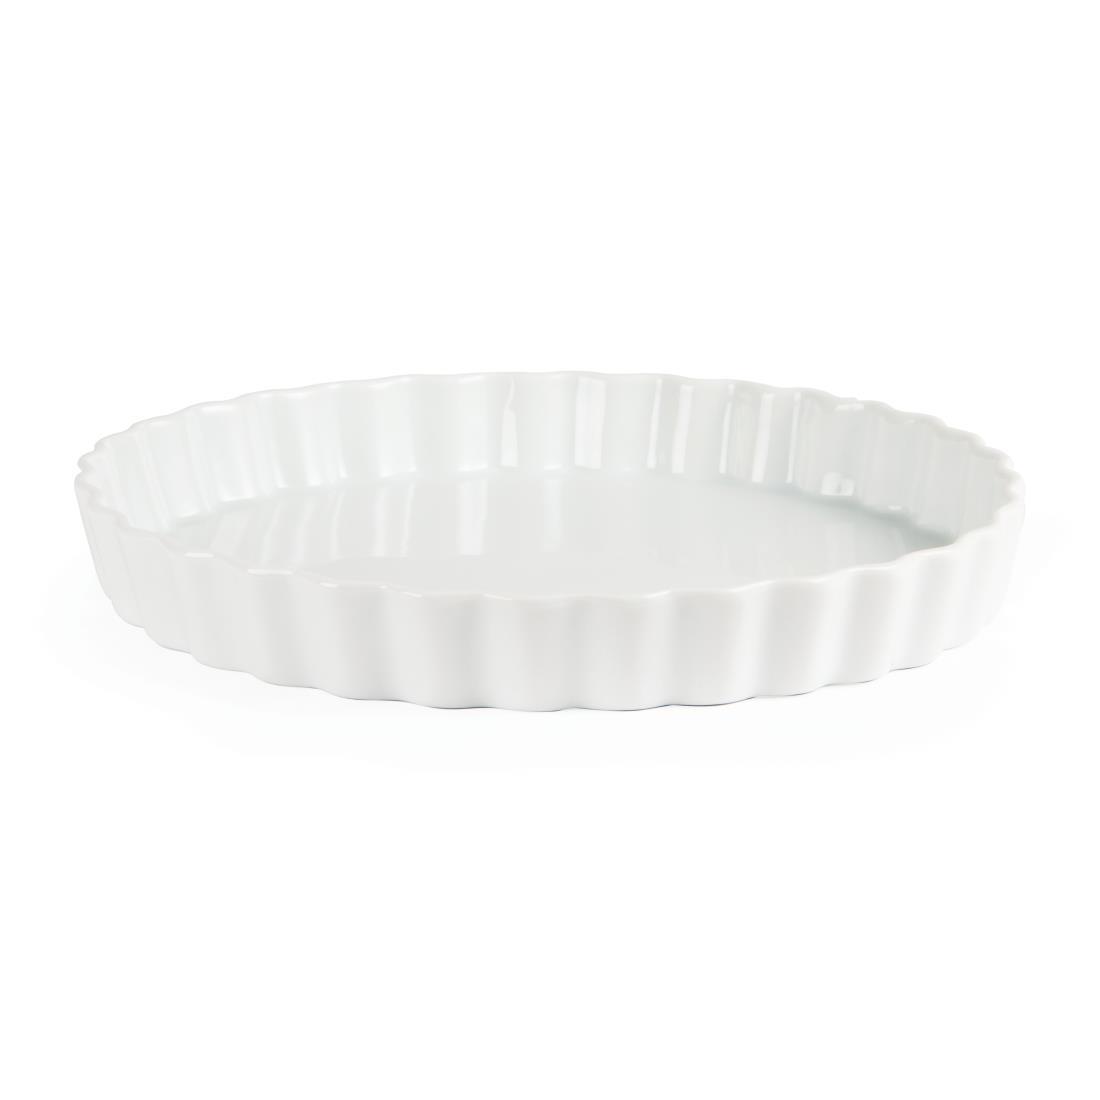 Olympia Whiteware Flan Dishes 297mm (Pack of 6) - W416  - 3